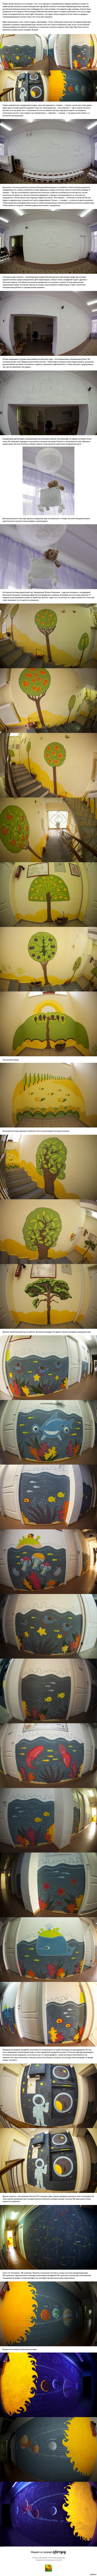 Painting a kindergarten with your own hands [Long post] - Kindergarten, Painting, Space, Longpost